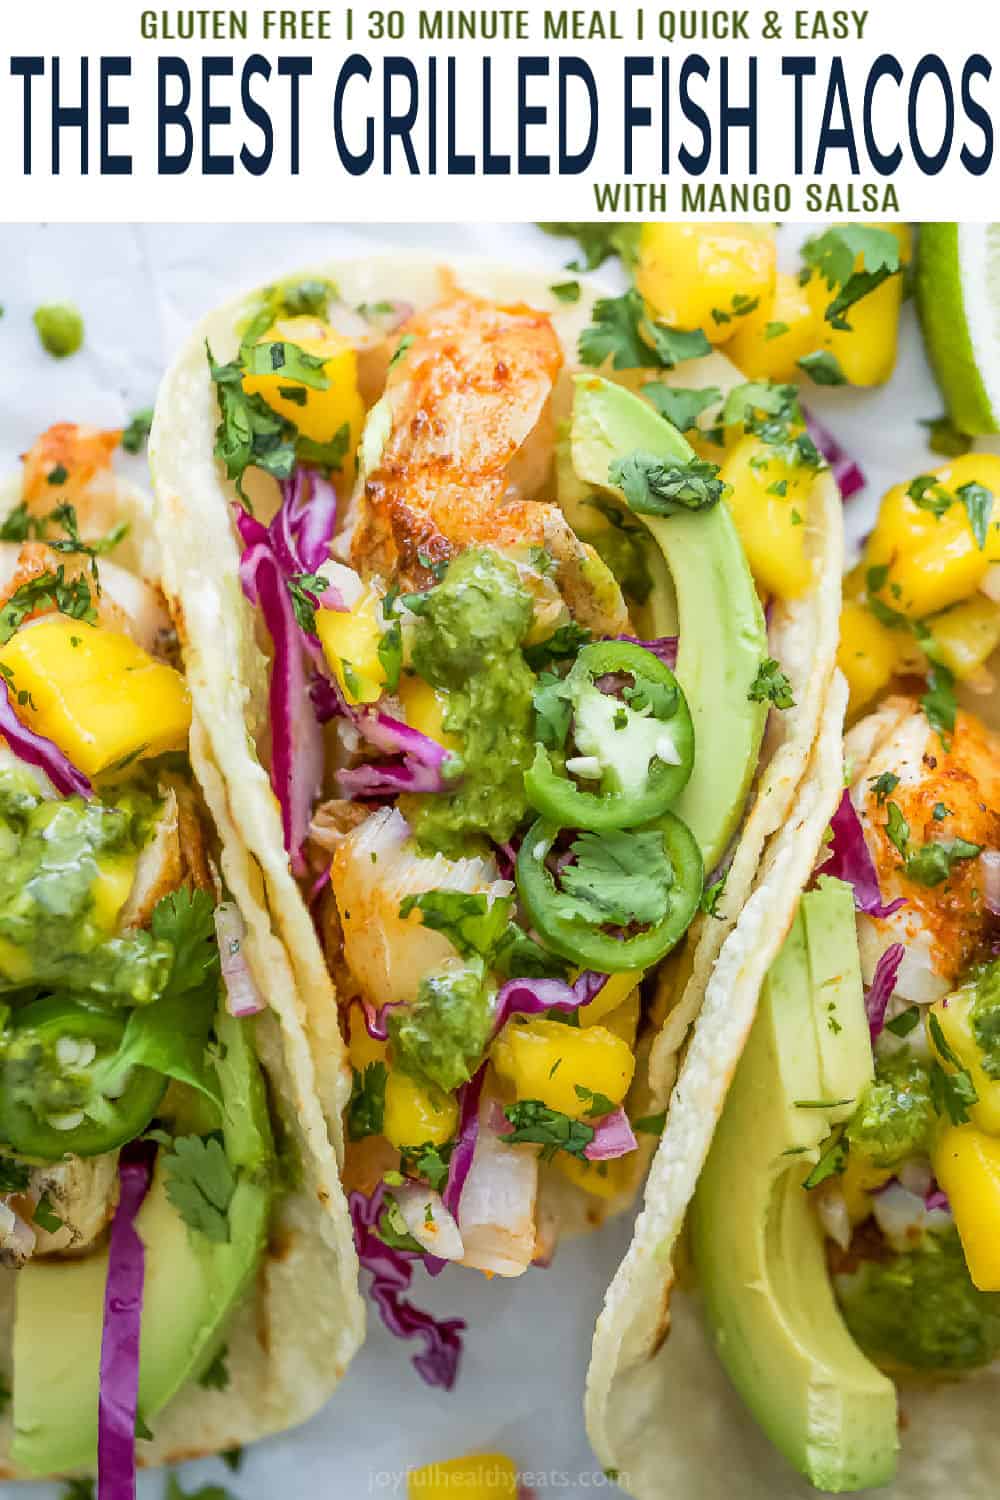 pinterst image for grilled fish tacos with mango salsa